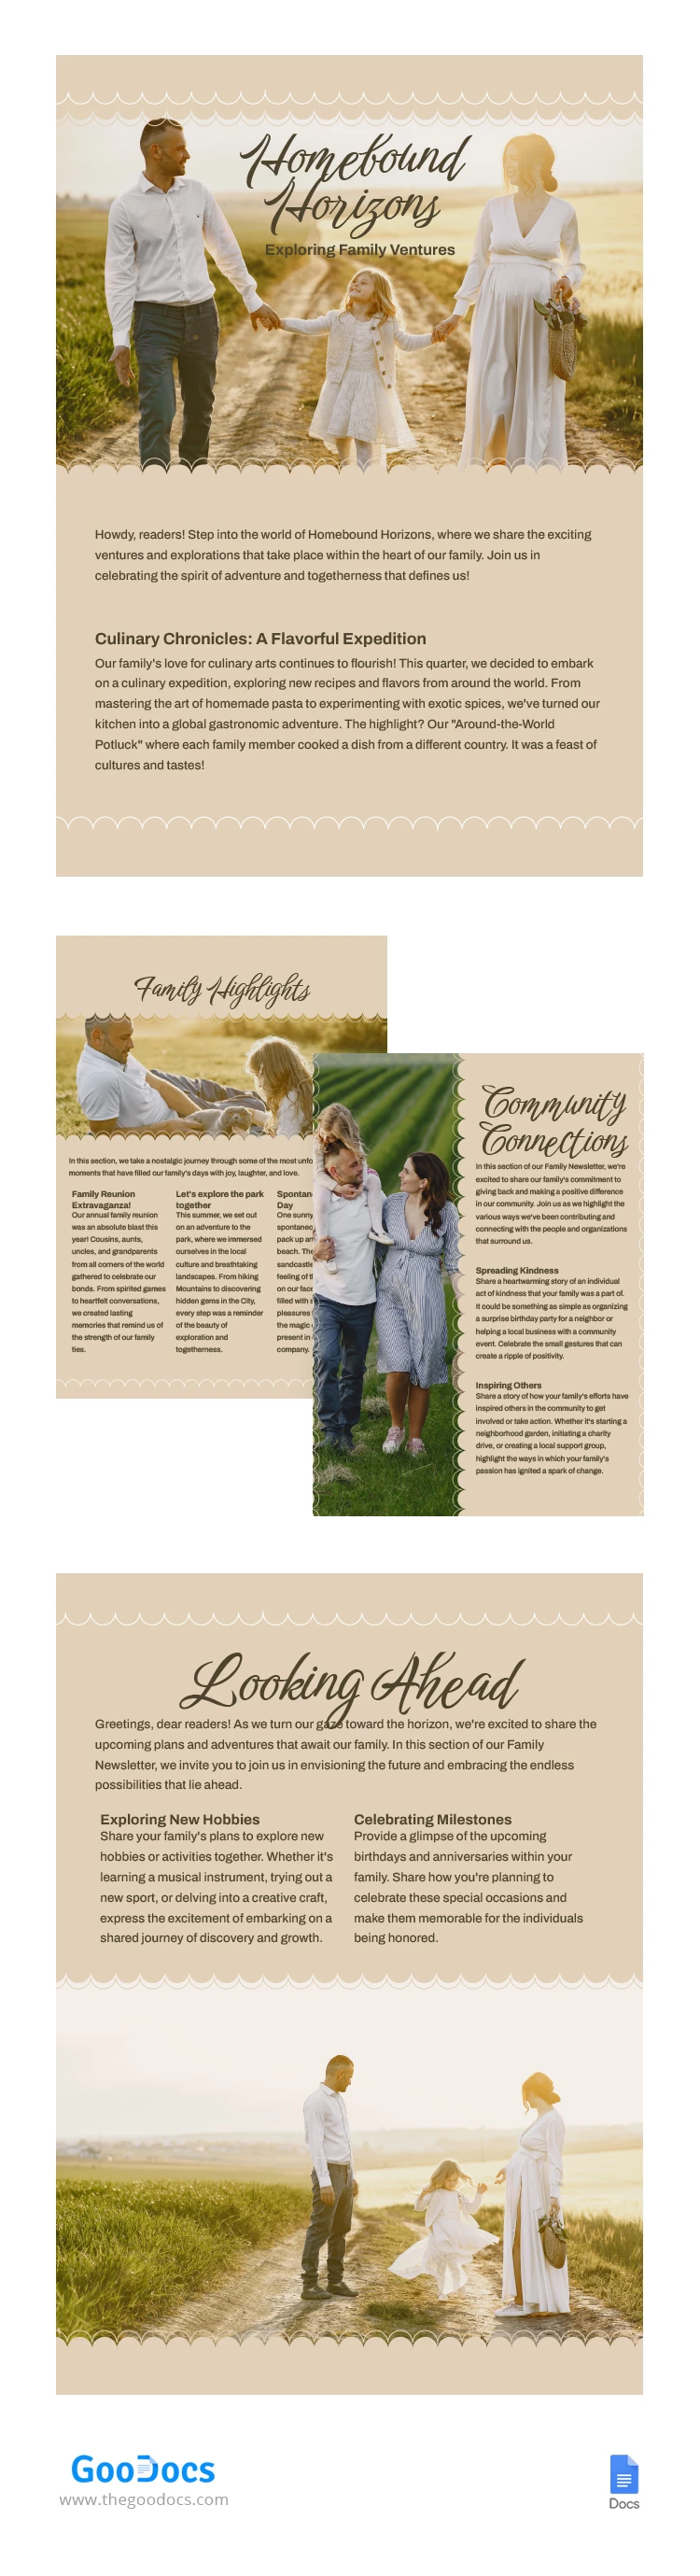 Simple Warm Family Newsletter - free Google Docs Template - 10066662